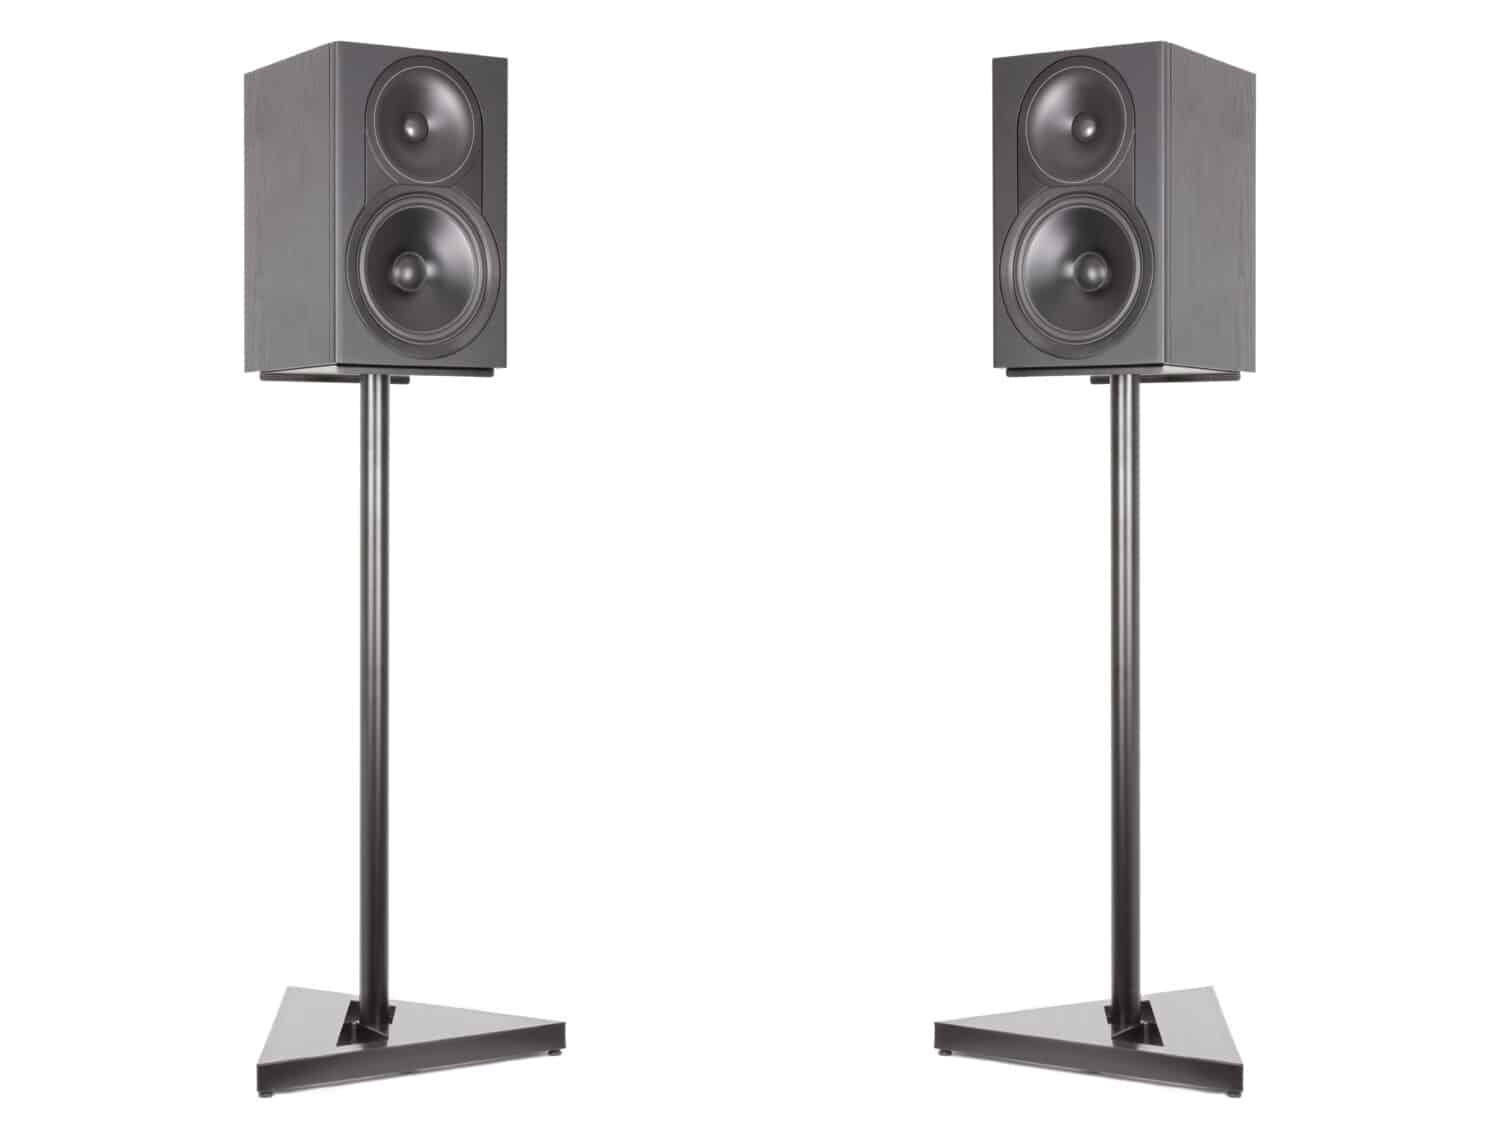 Two monitor audio studio stands and a professional horizontal speaker. Pa System Speaker. Isolated white background